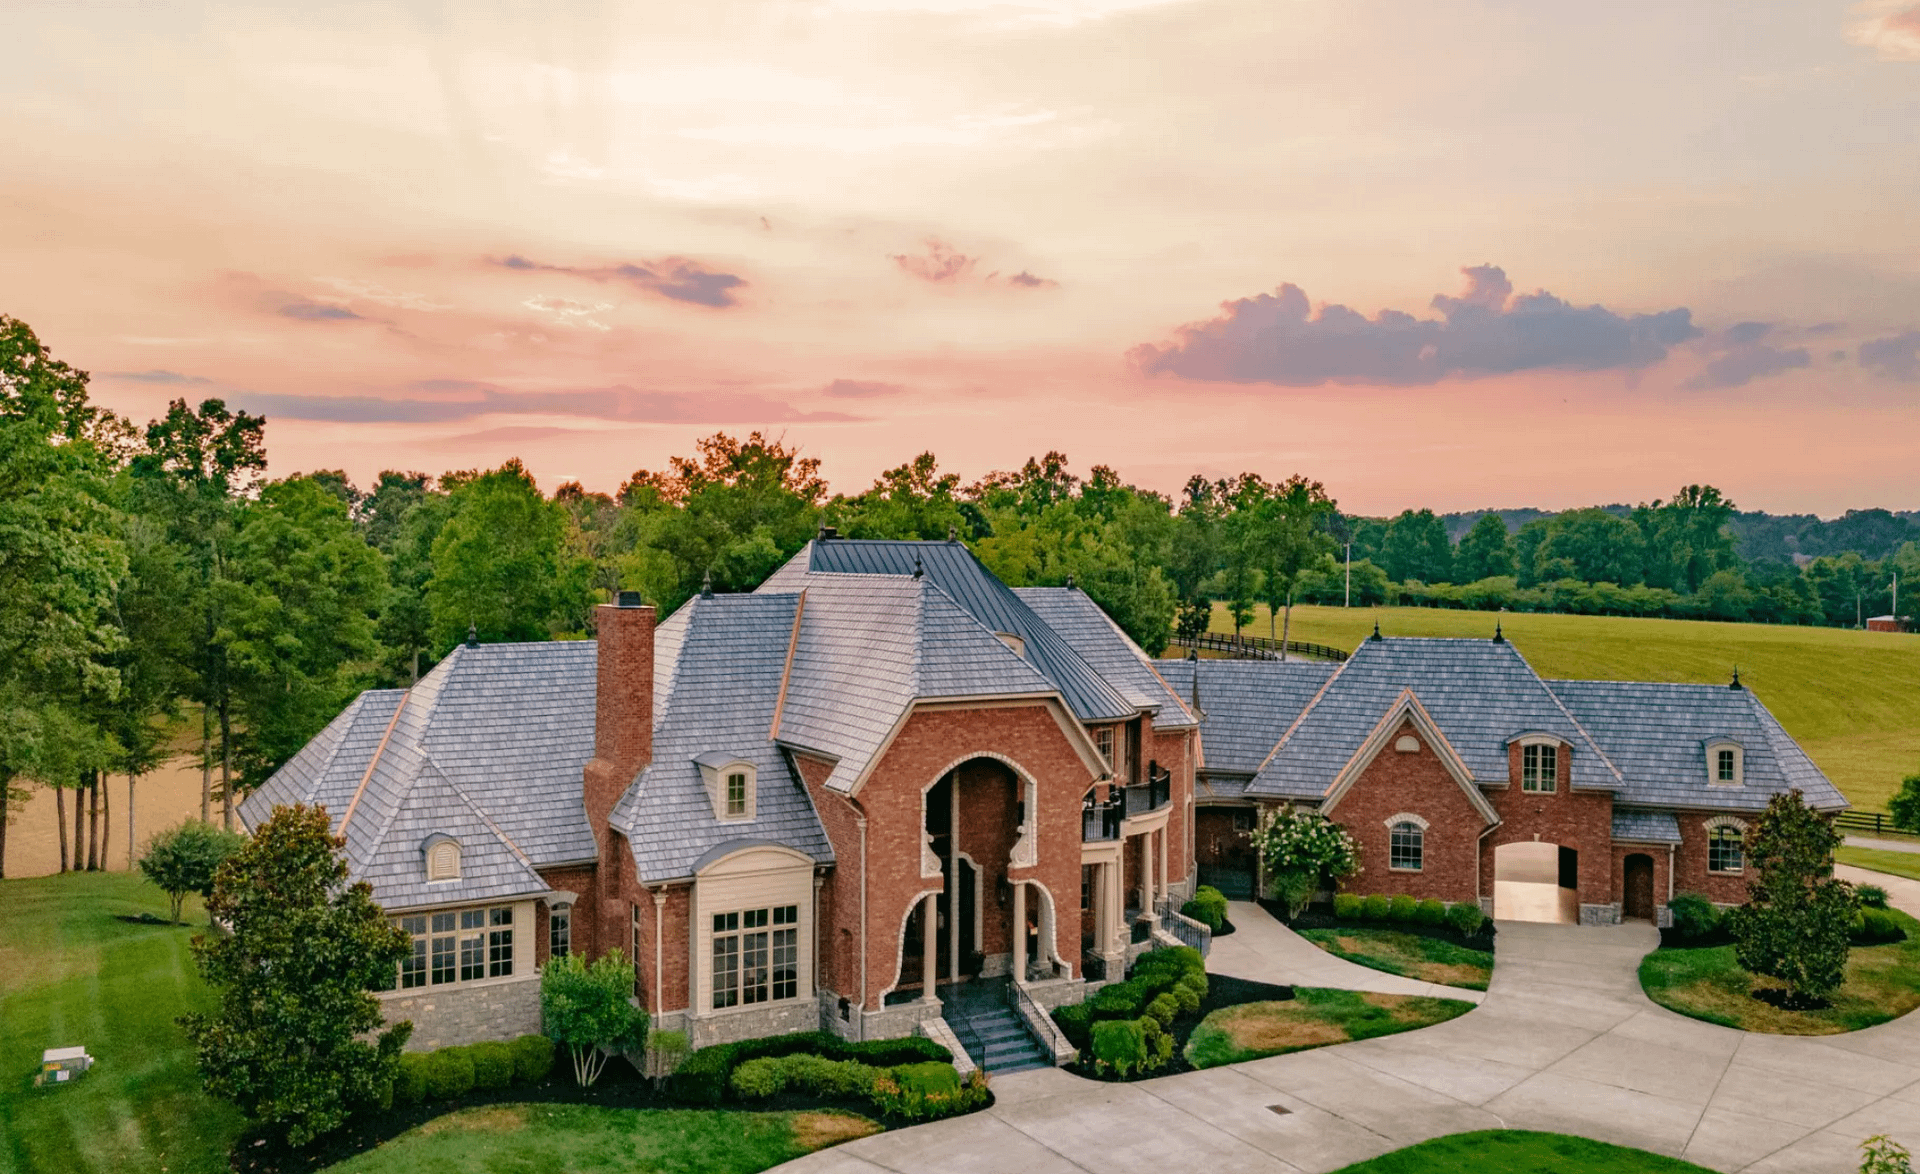 Brick Home On 60 Acres In Tennessee (PHOTOS)